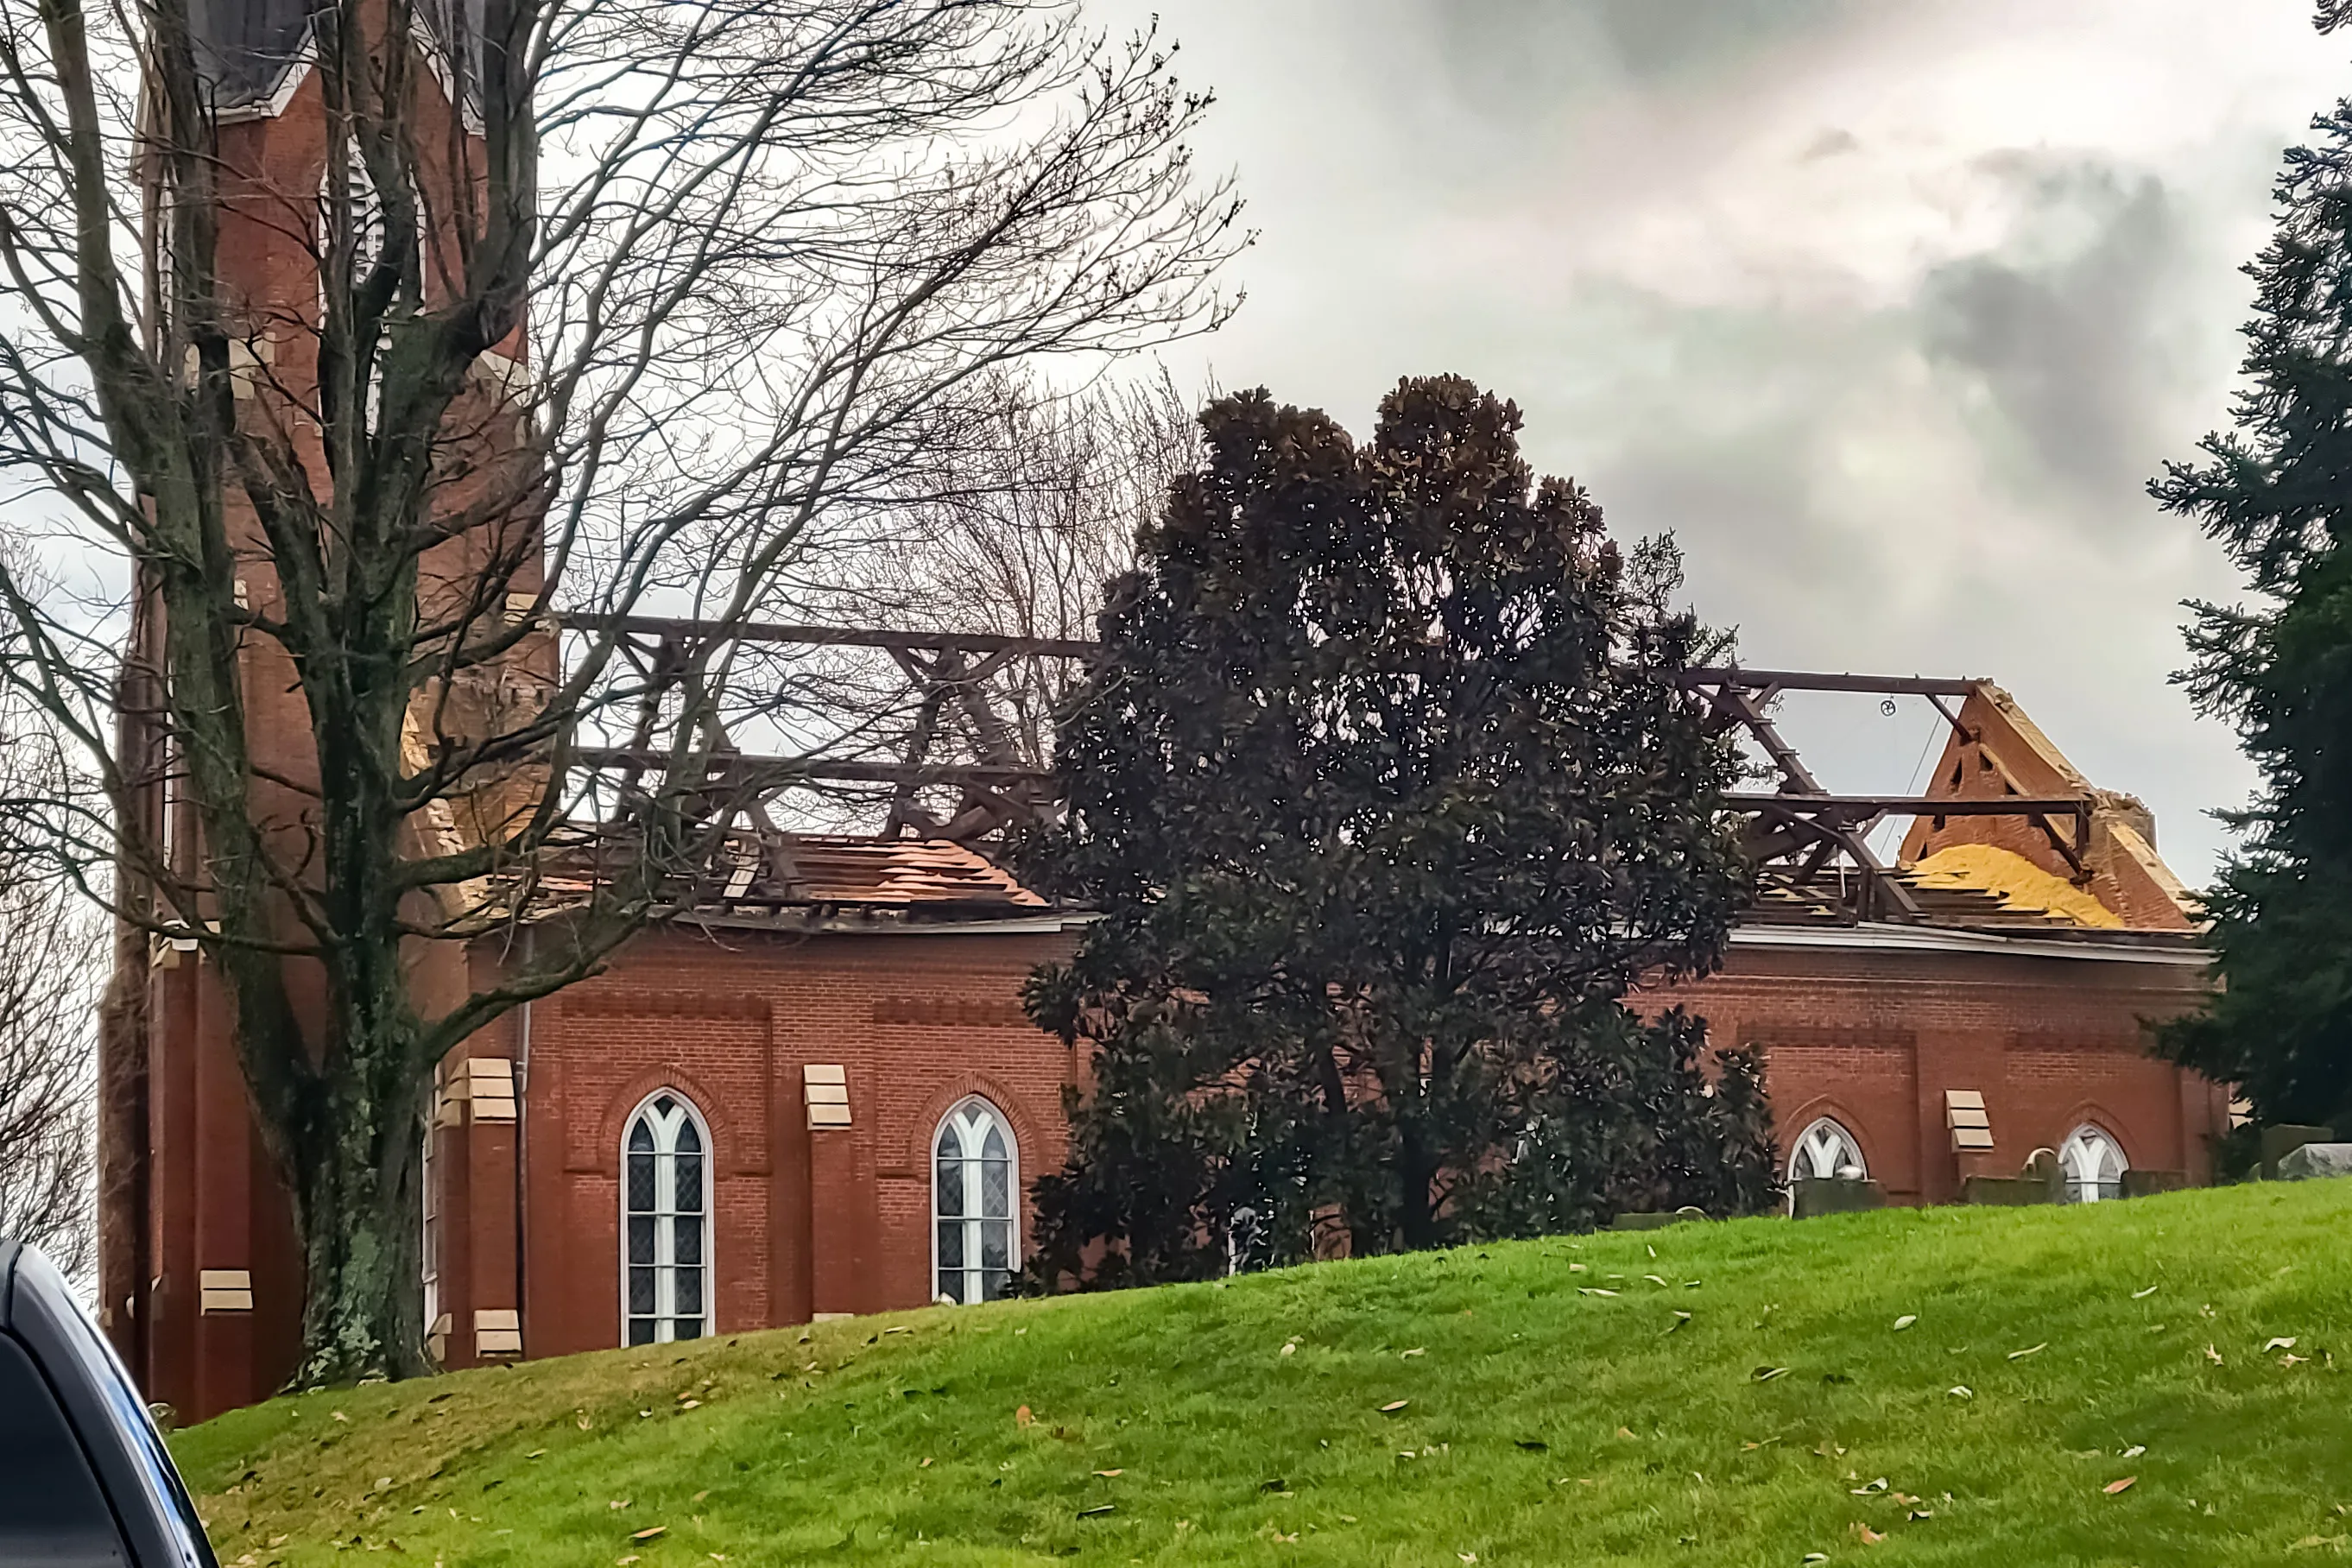 Undamaged trees surround St. Joseph Church in Vanderburgh County, which lost its roof to a severe storm that moved through the area March 3, 2023.?w=200&h=150